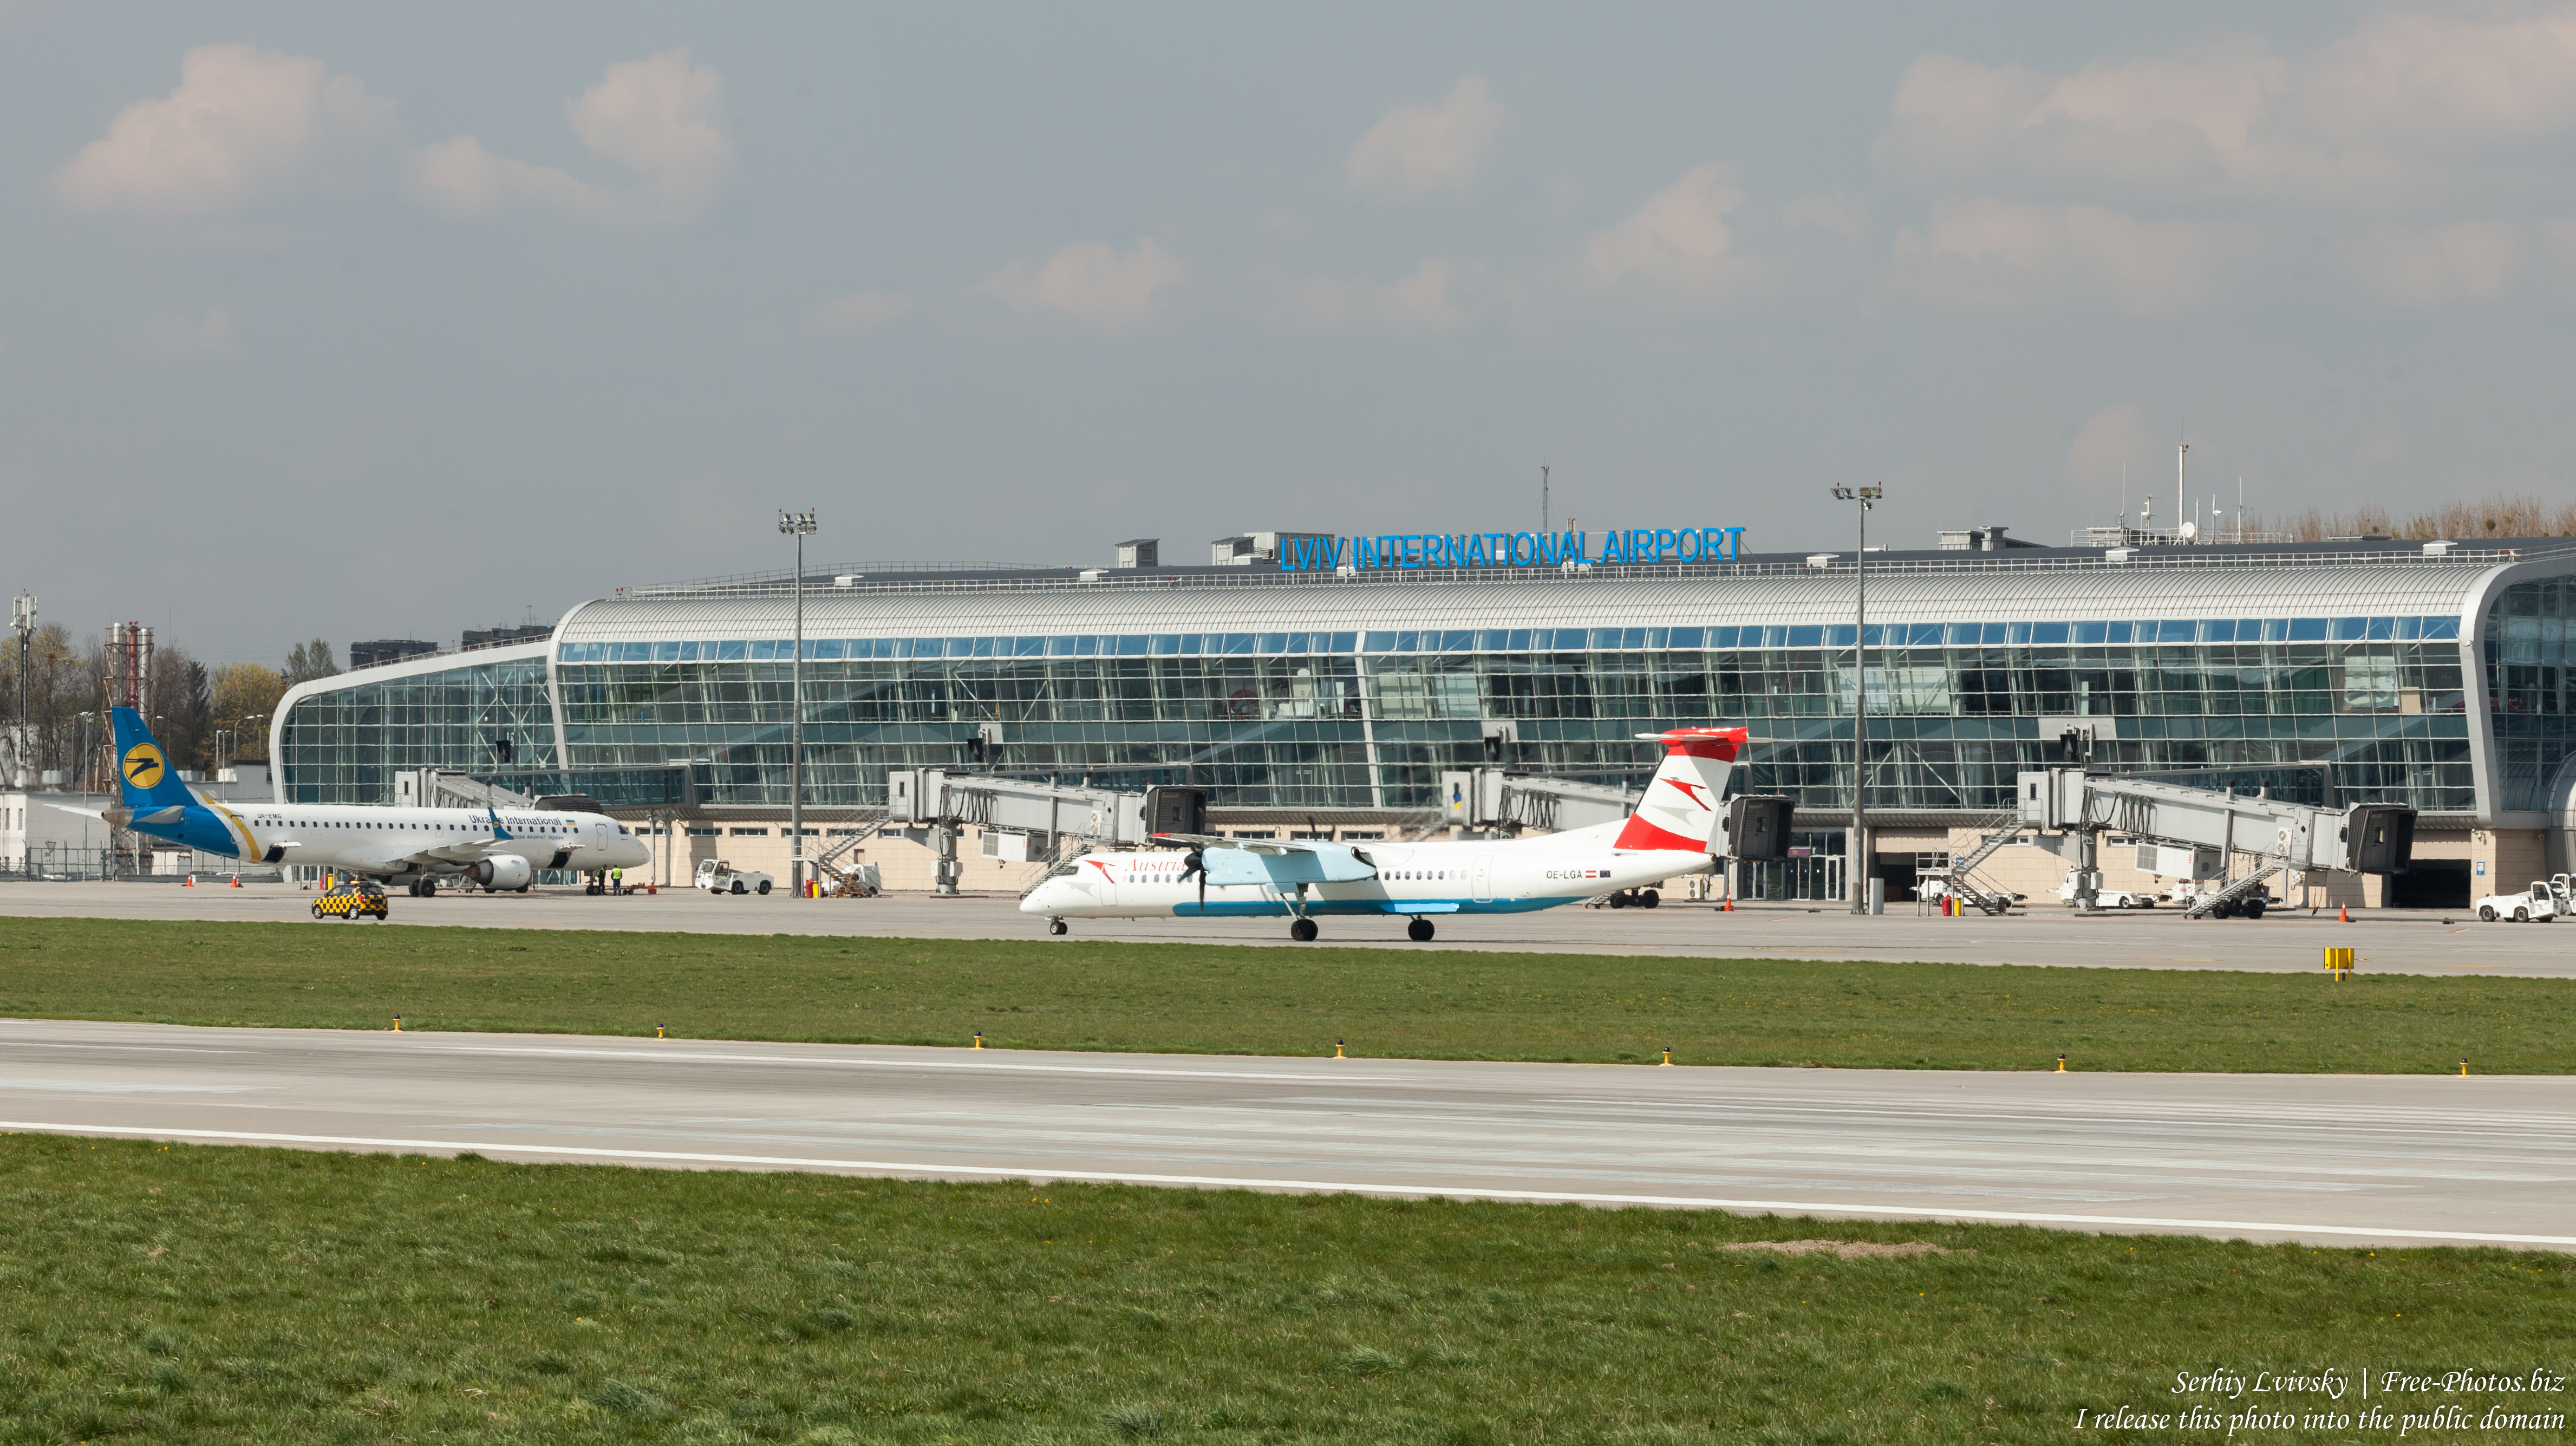 Lviv airport photographed in April 2019 by Serhiy Lvivsky, picture 12